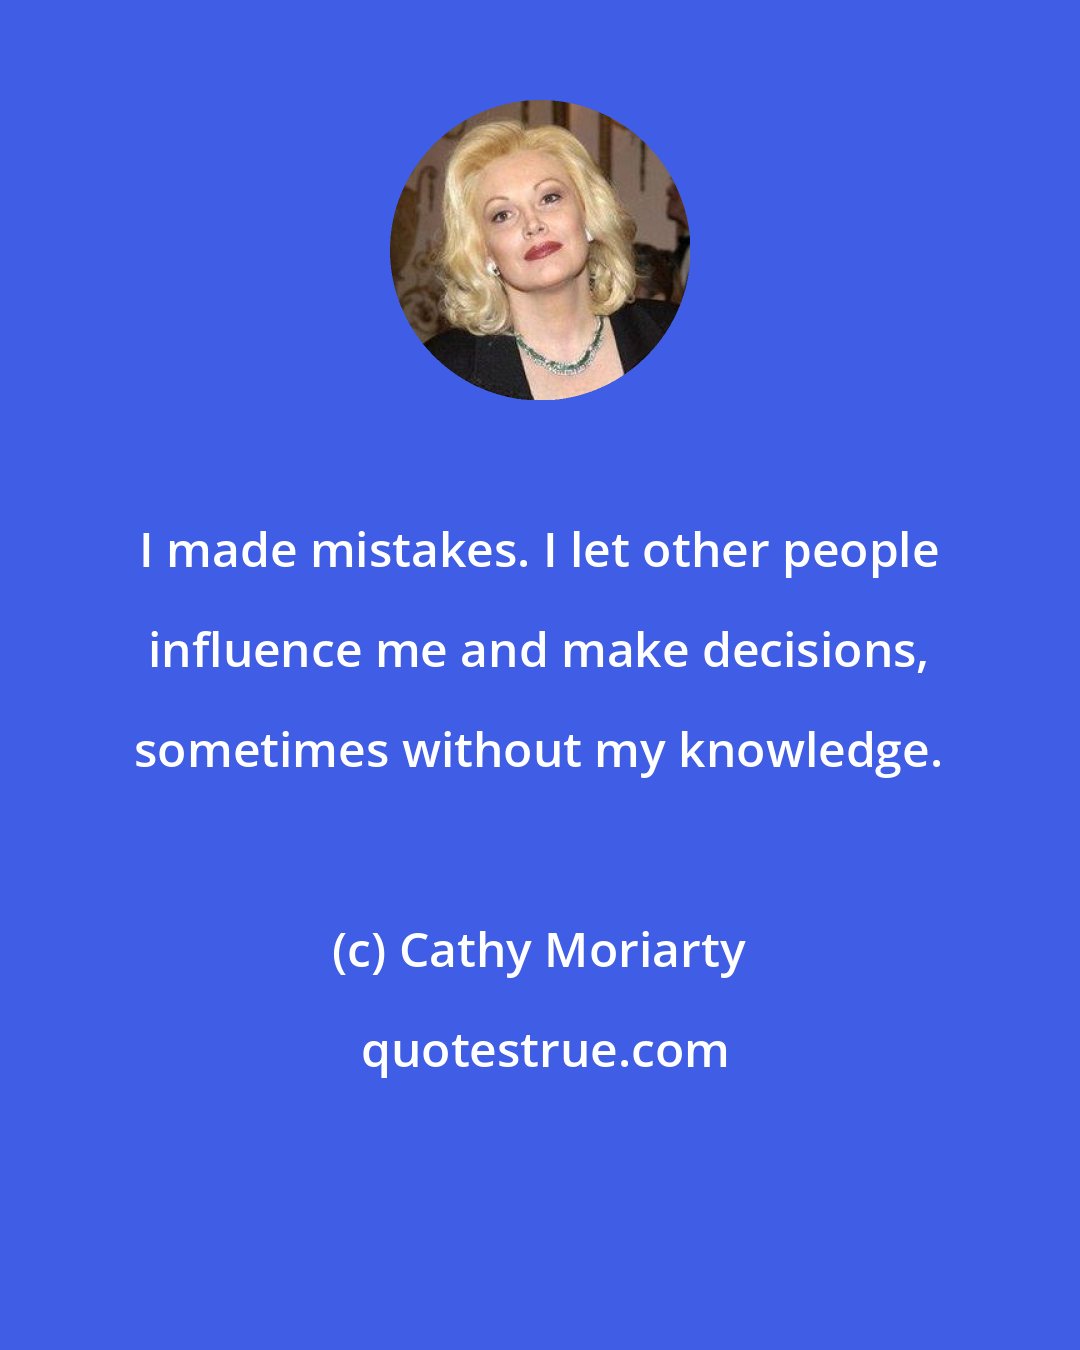 Cathy Moriarty: I made mistakes. I let other people influence me and make decisions, sometimes without my knowledge.